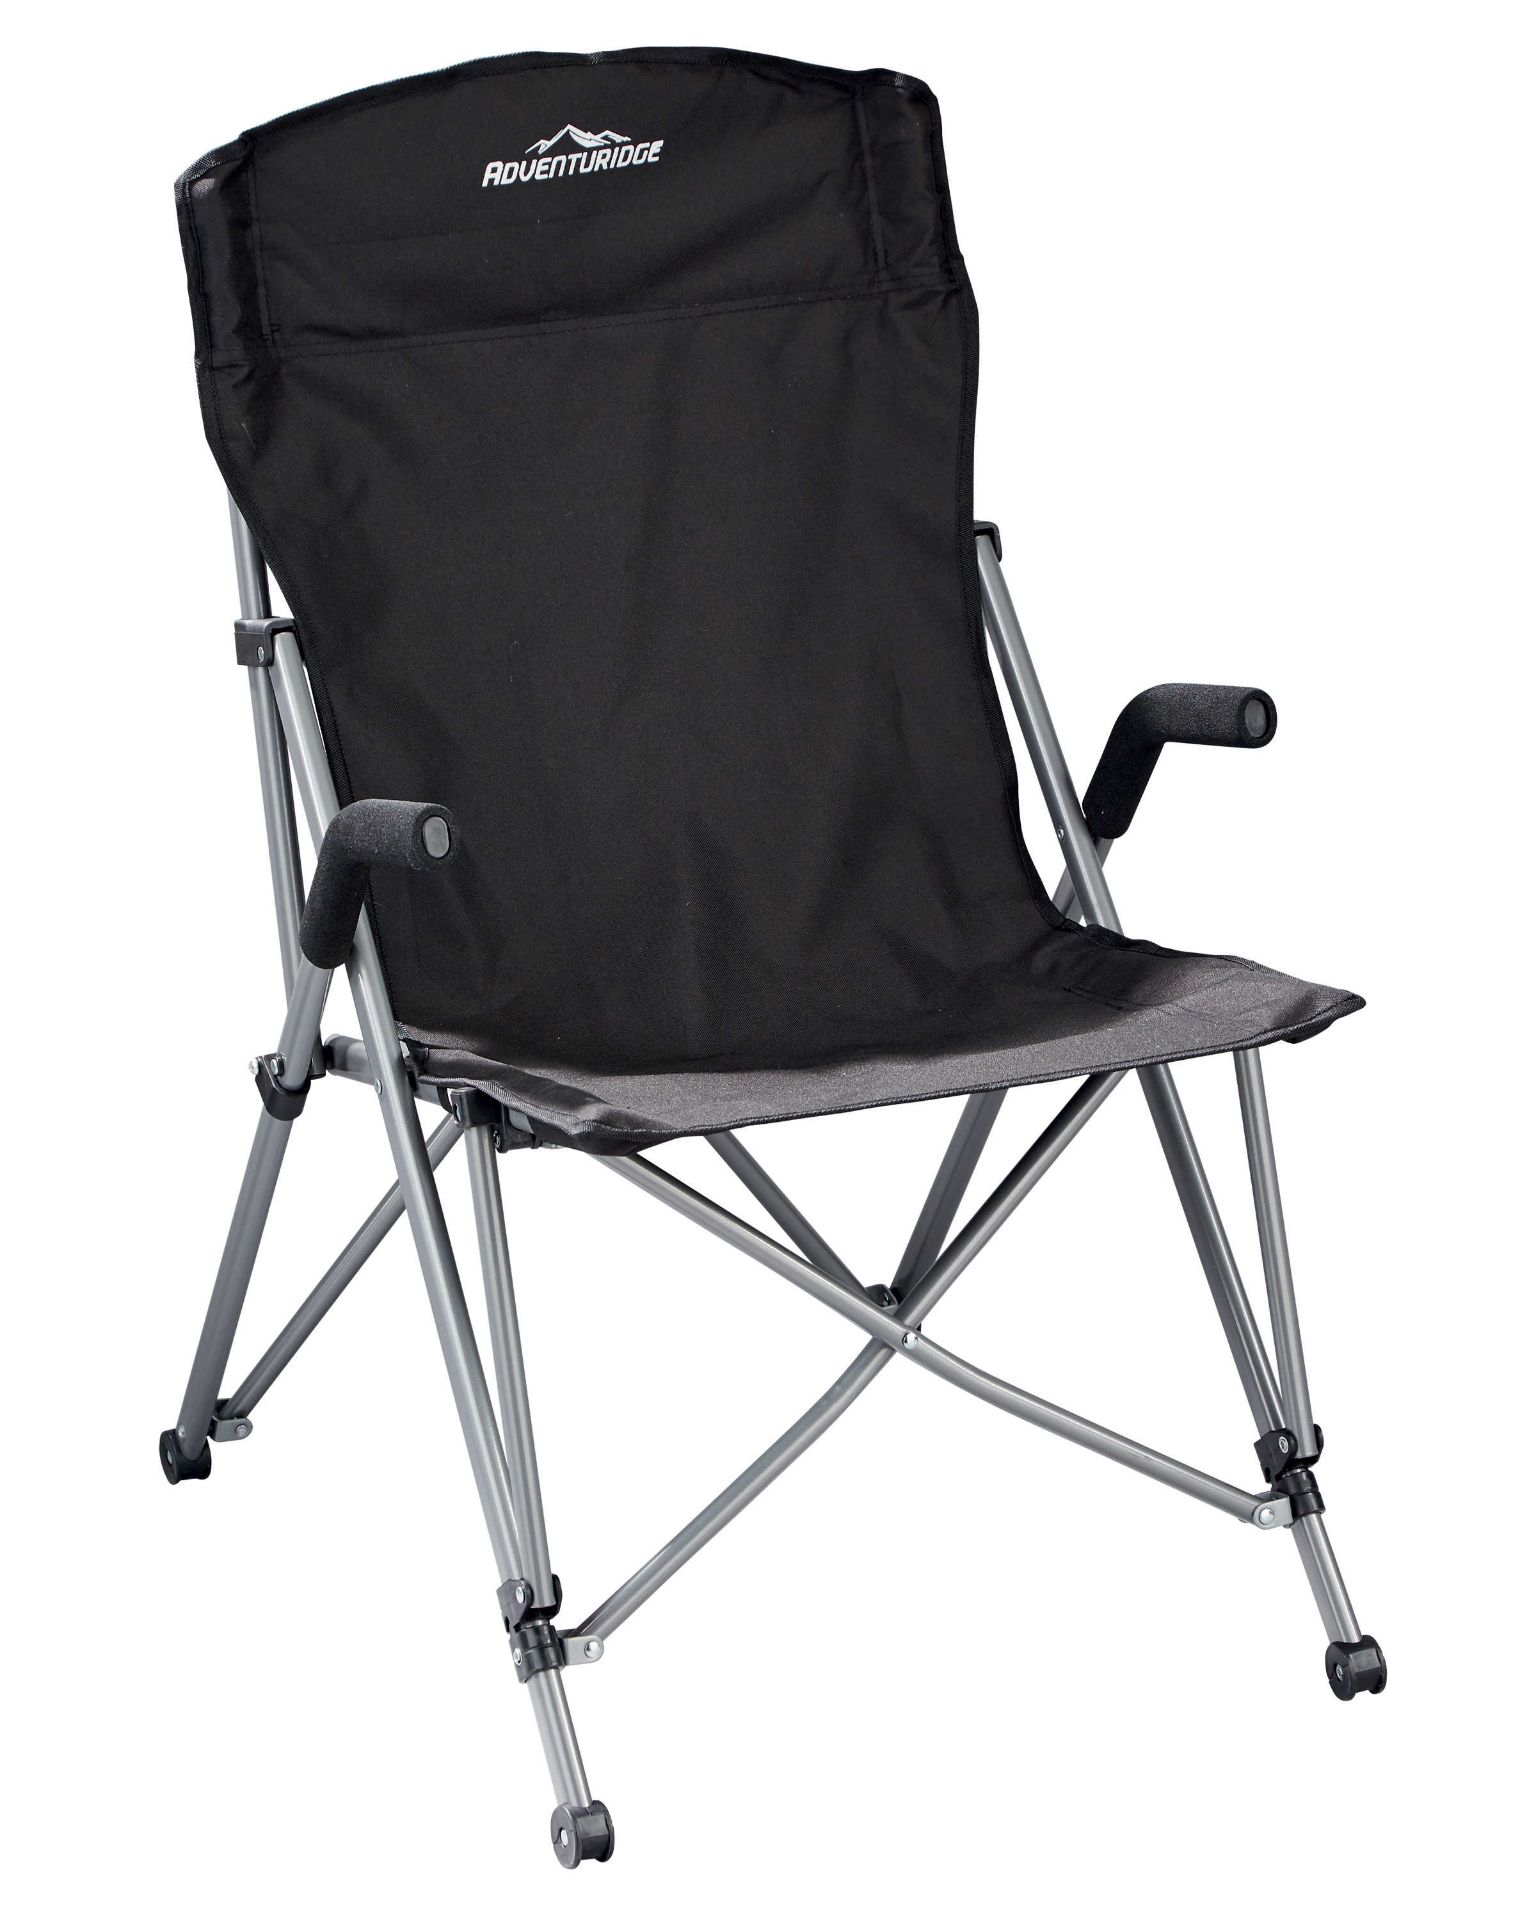 V *TRADE QTY* Brand New Expedition Chair In Silver/Black With Carry Case - Lightweight Steel Frame